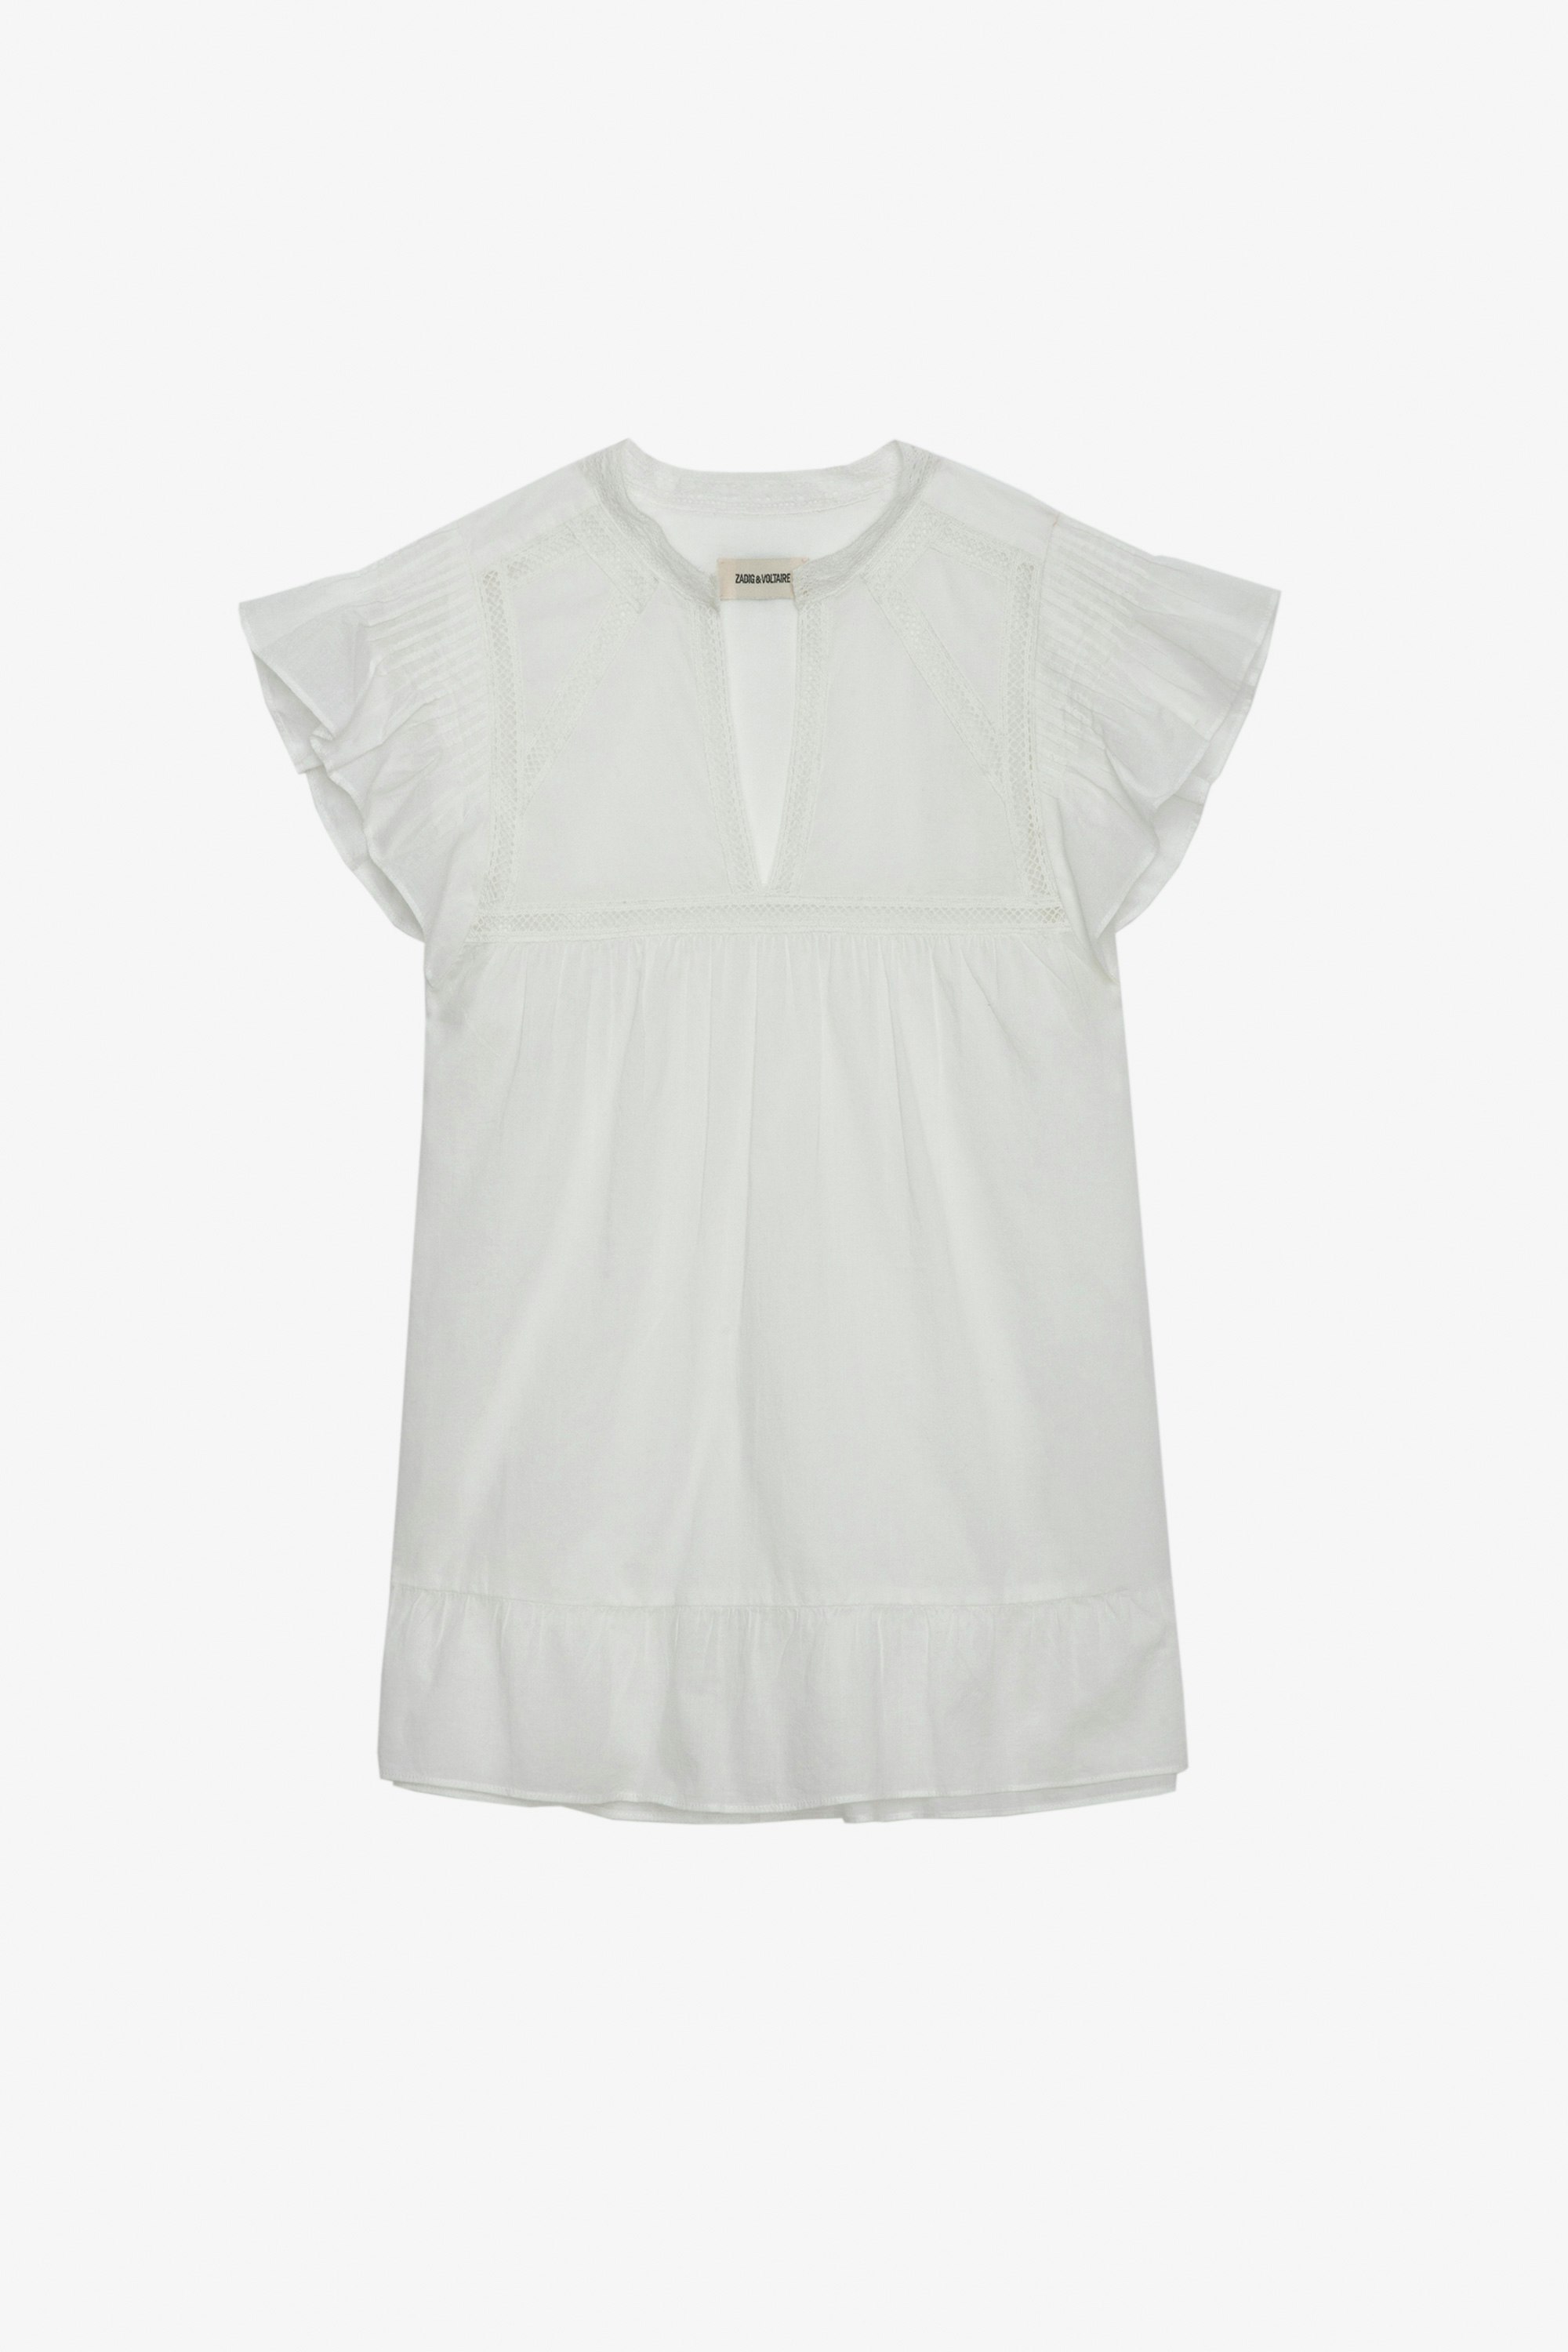 Tolded Top - White cotton short-sleeved top with ruffles and laces.